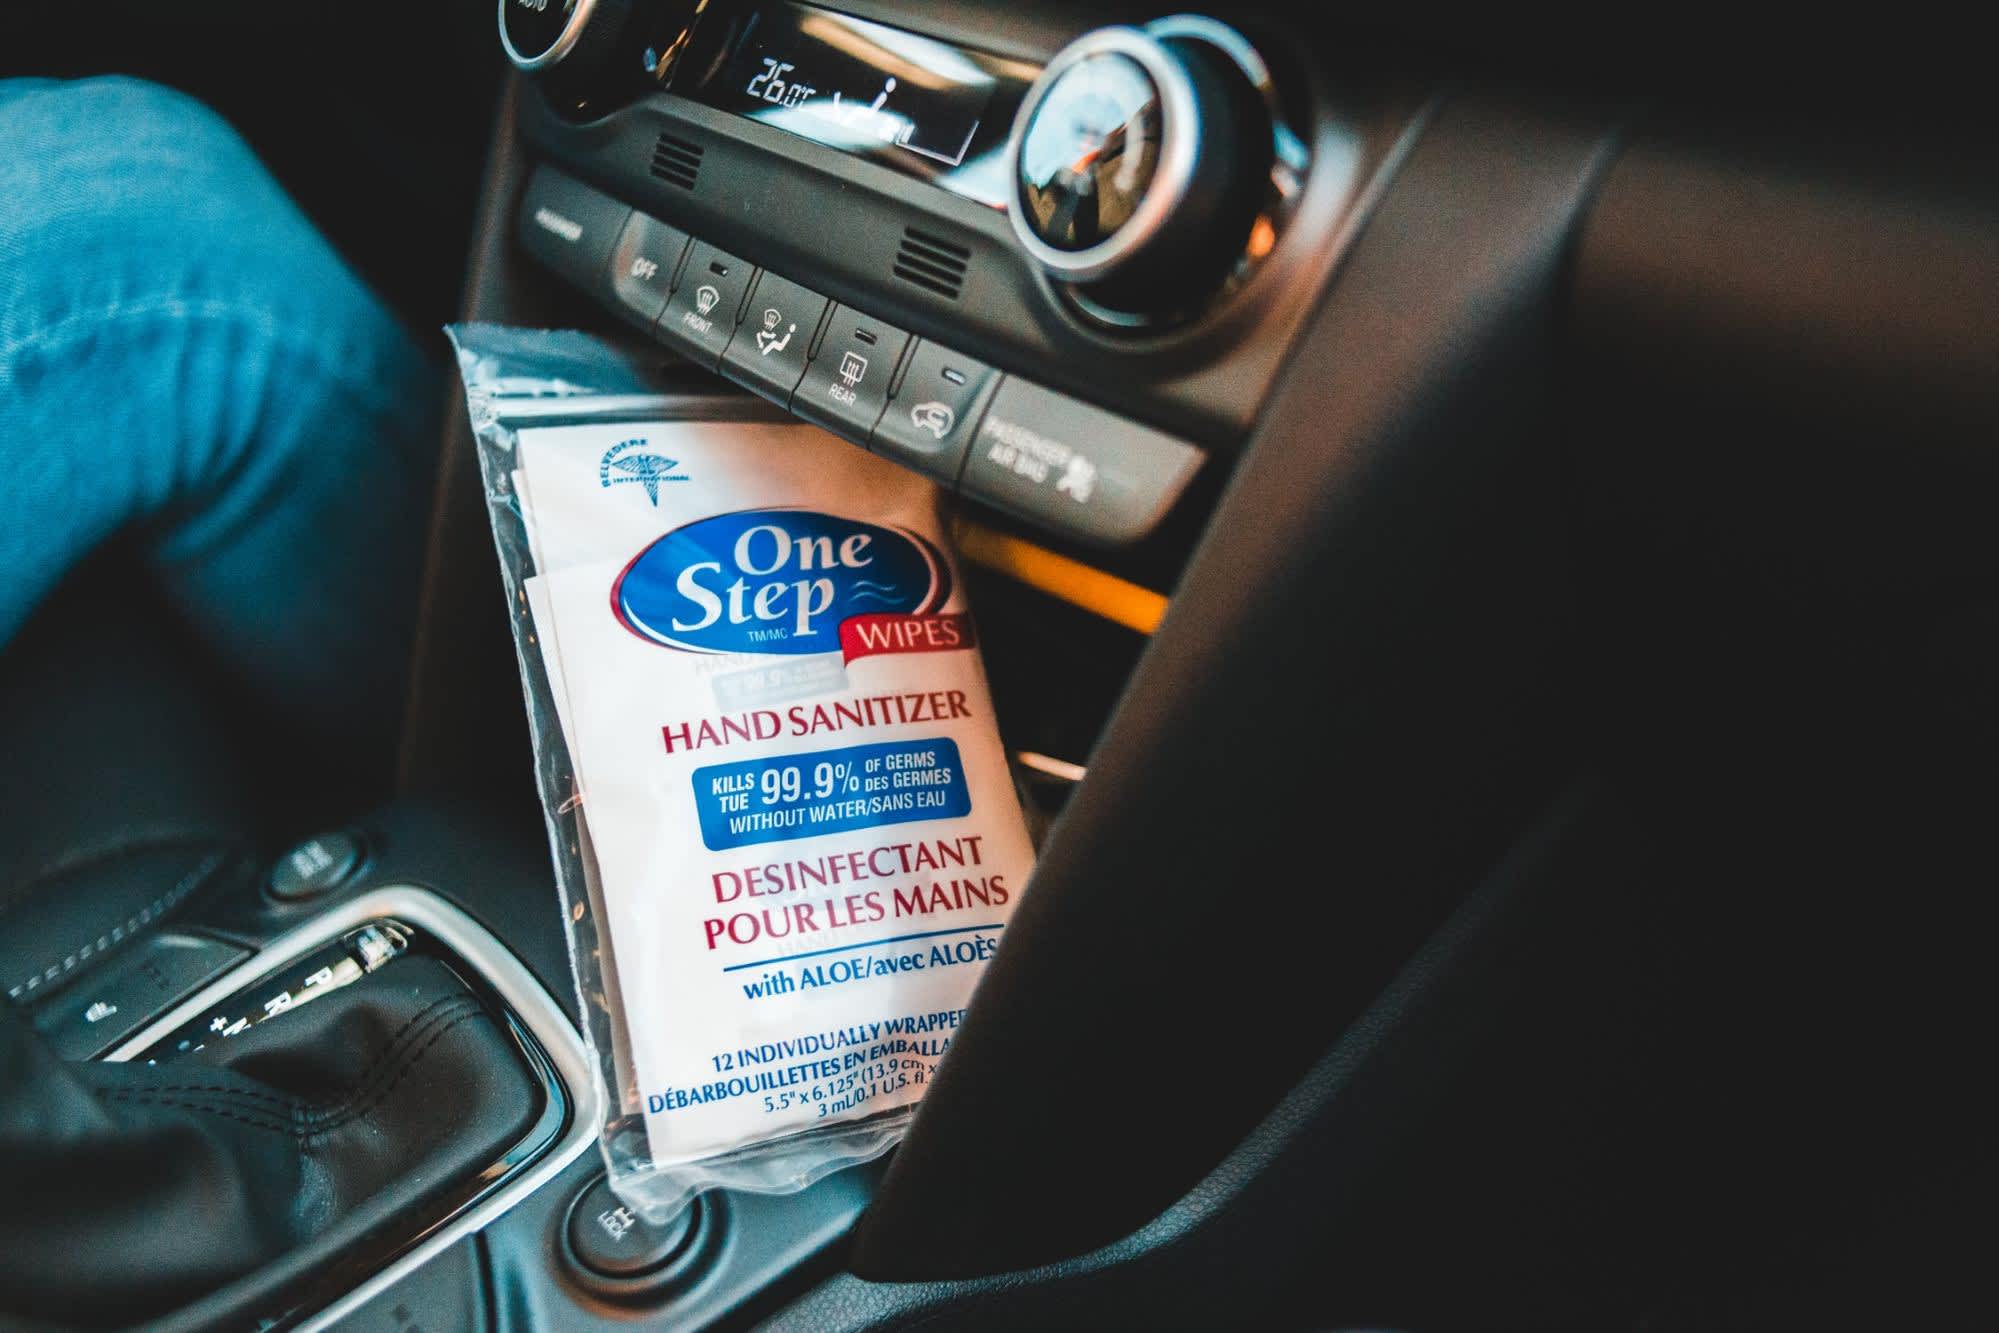 Disinfecting wipes inside a car